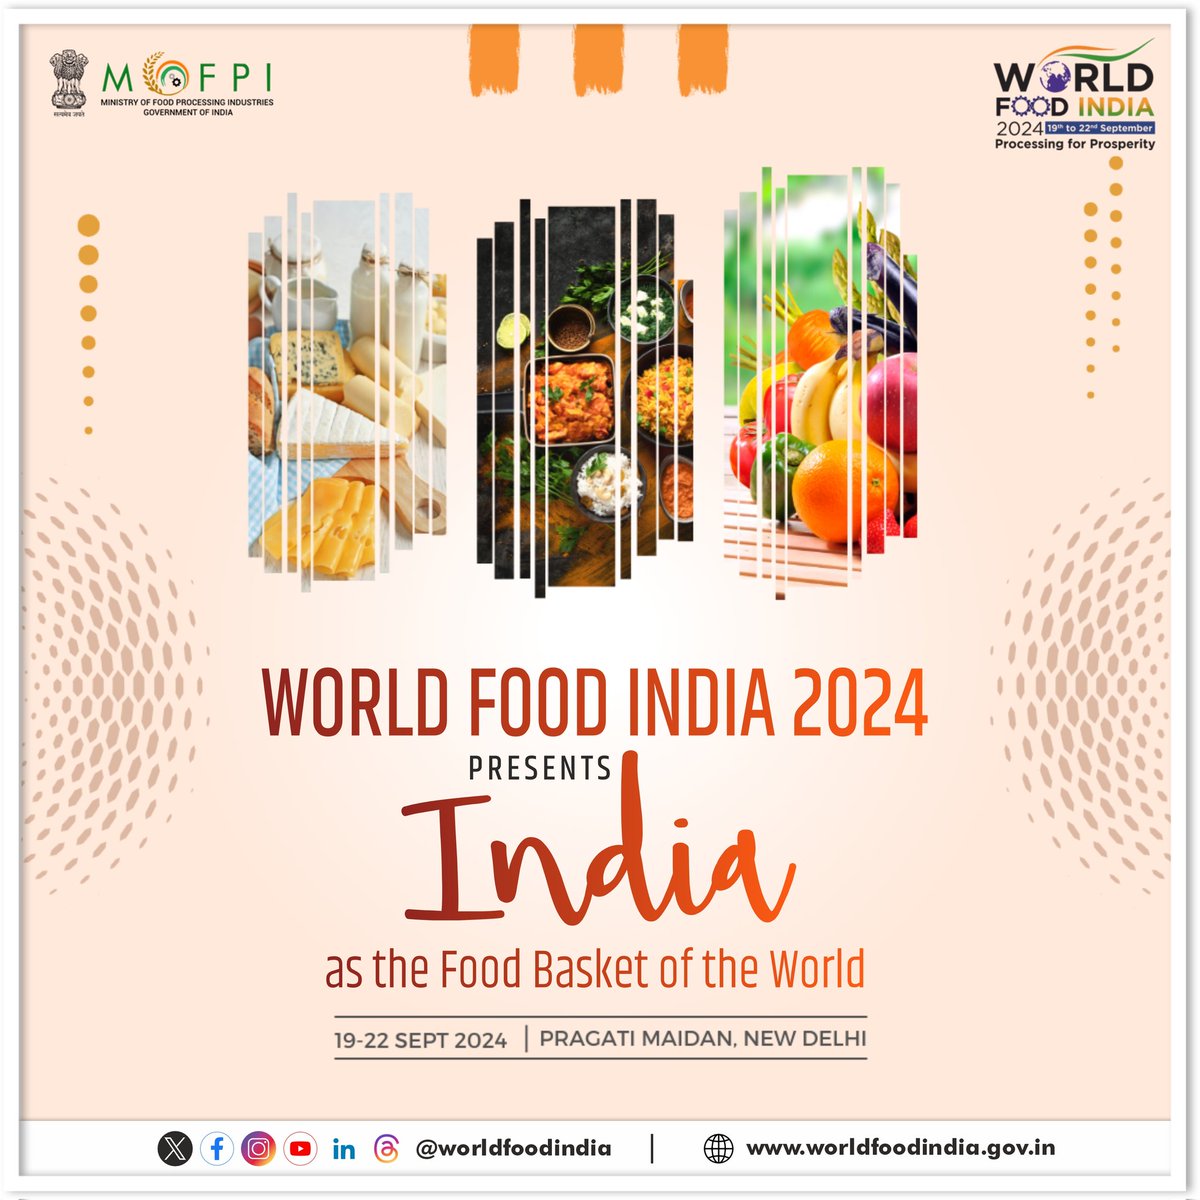 India's flourishing food industry at #WorldFoodIndia2024 will take a step ahead. Do discover opportunities for growth and innovation. Visit worldfoodindia.gov.in for more details! @MOFPI_GOI @ficci_india @investindia @mygovindia @MyGovHindi